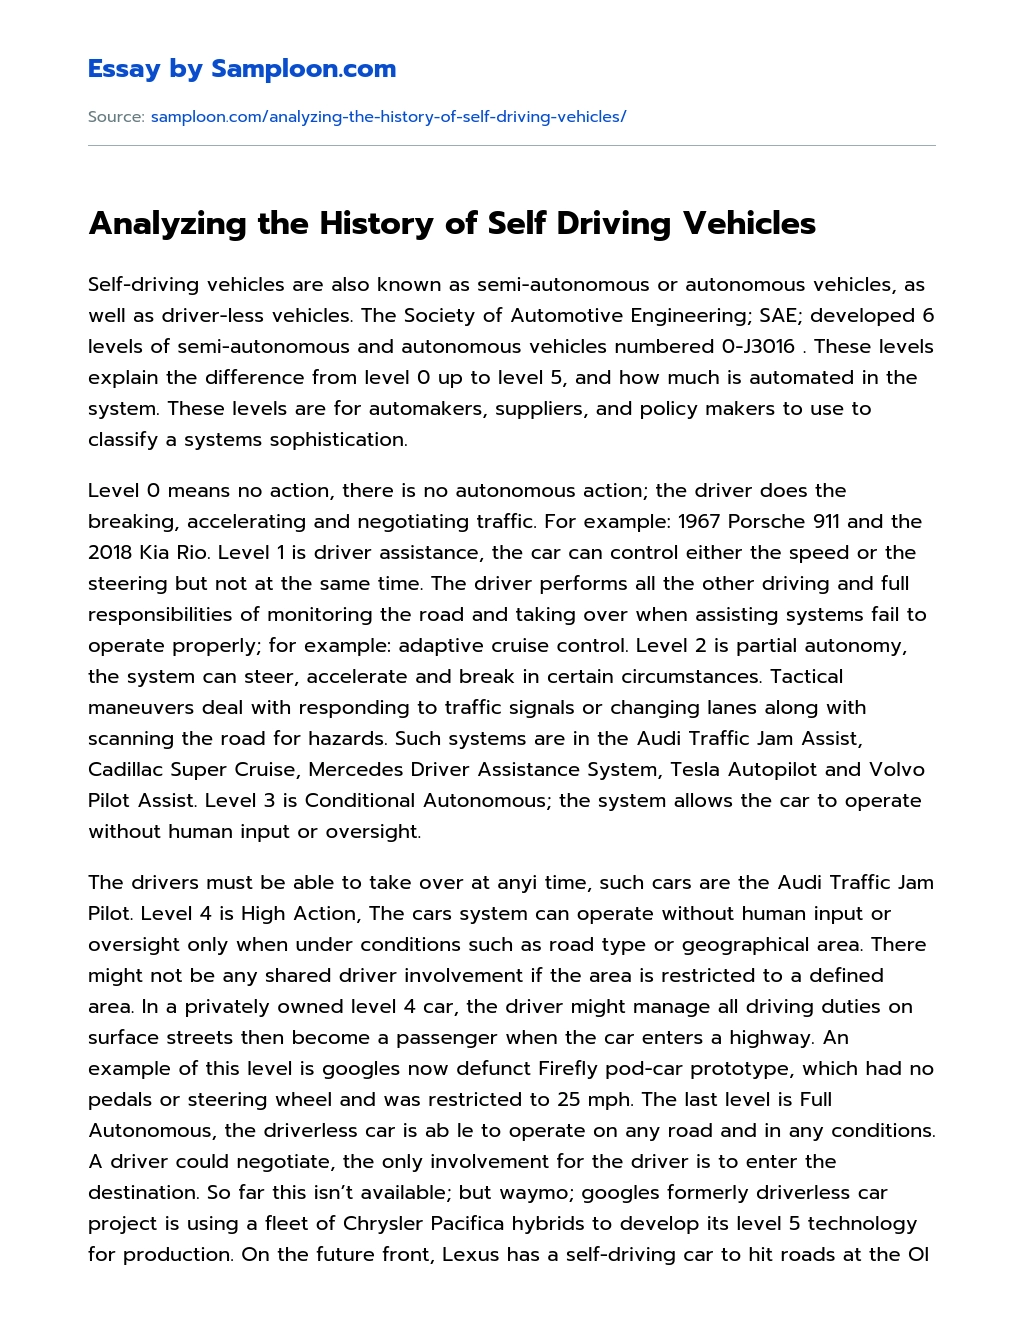 Analyzing the History of Self Driving Vehicles essay